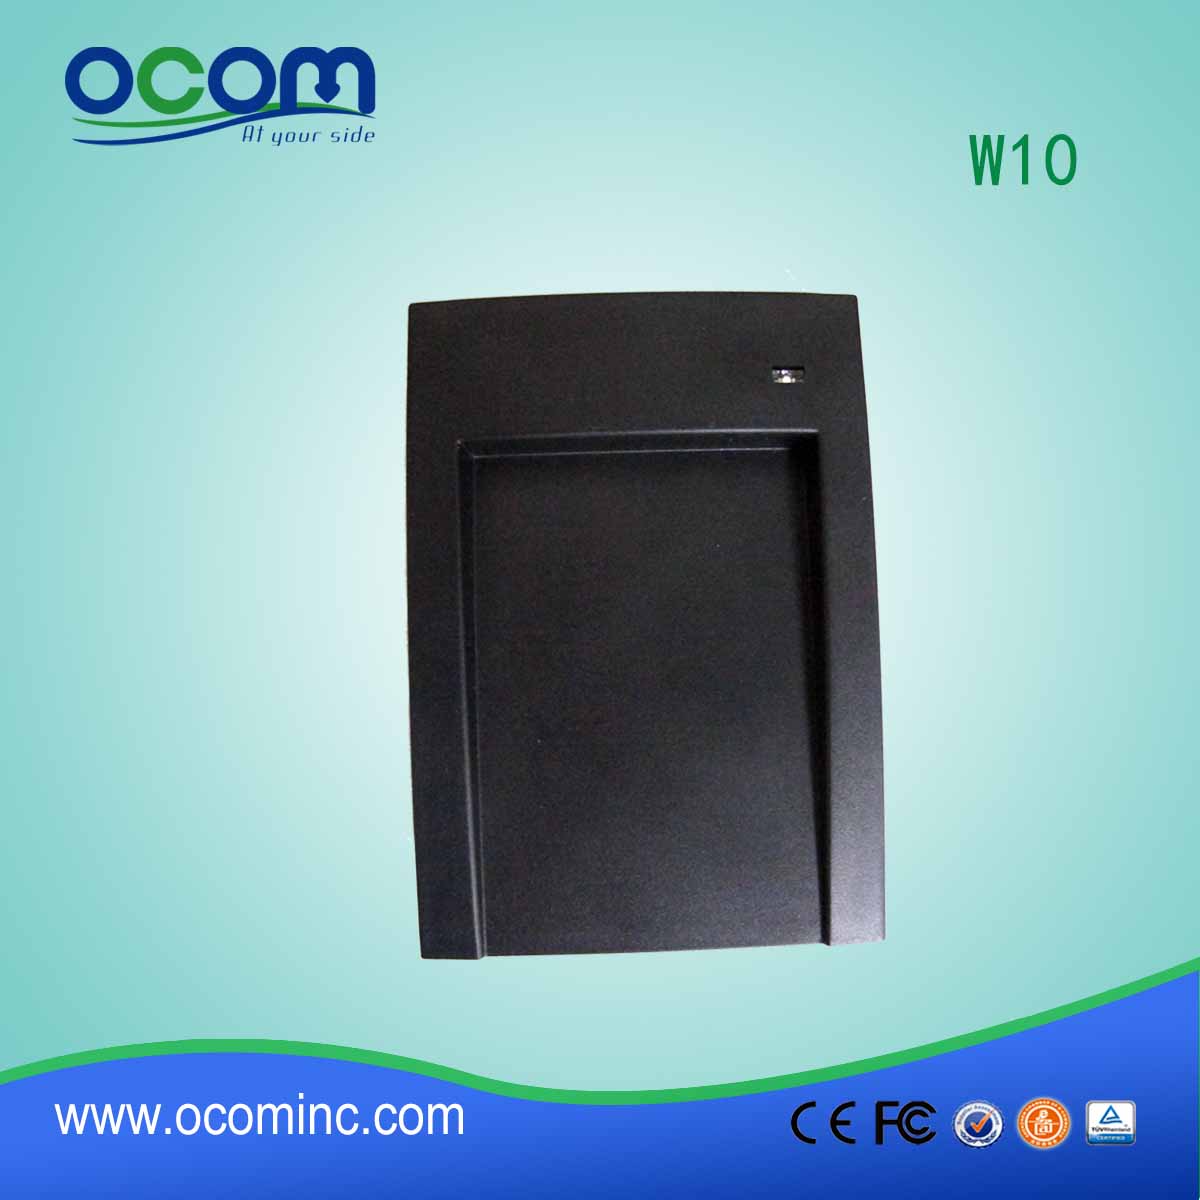 OCOM-W10 RFID Card Reader and Writer 13.56MHZ  ISO14443 TYPEA/B ISO15693 protocol